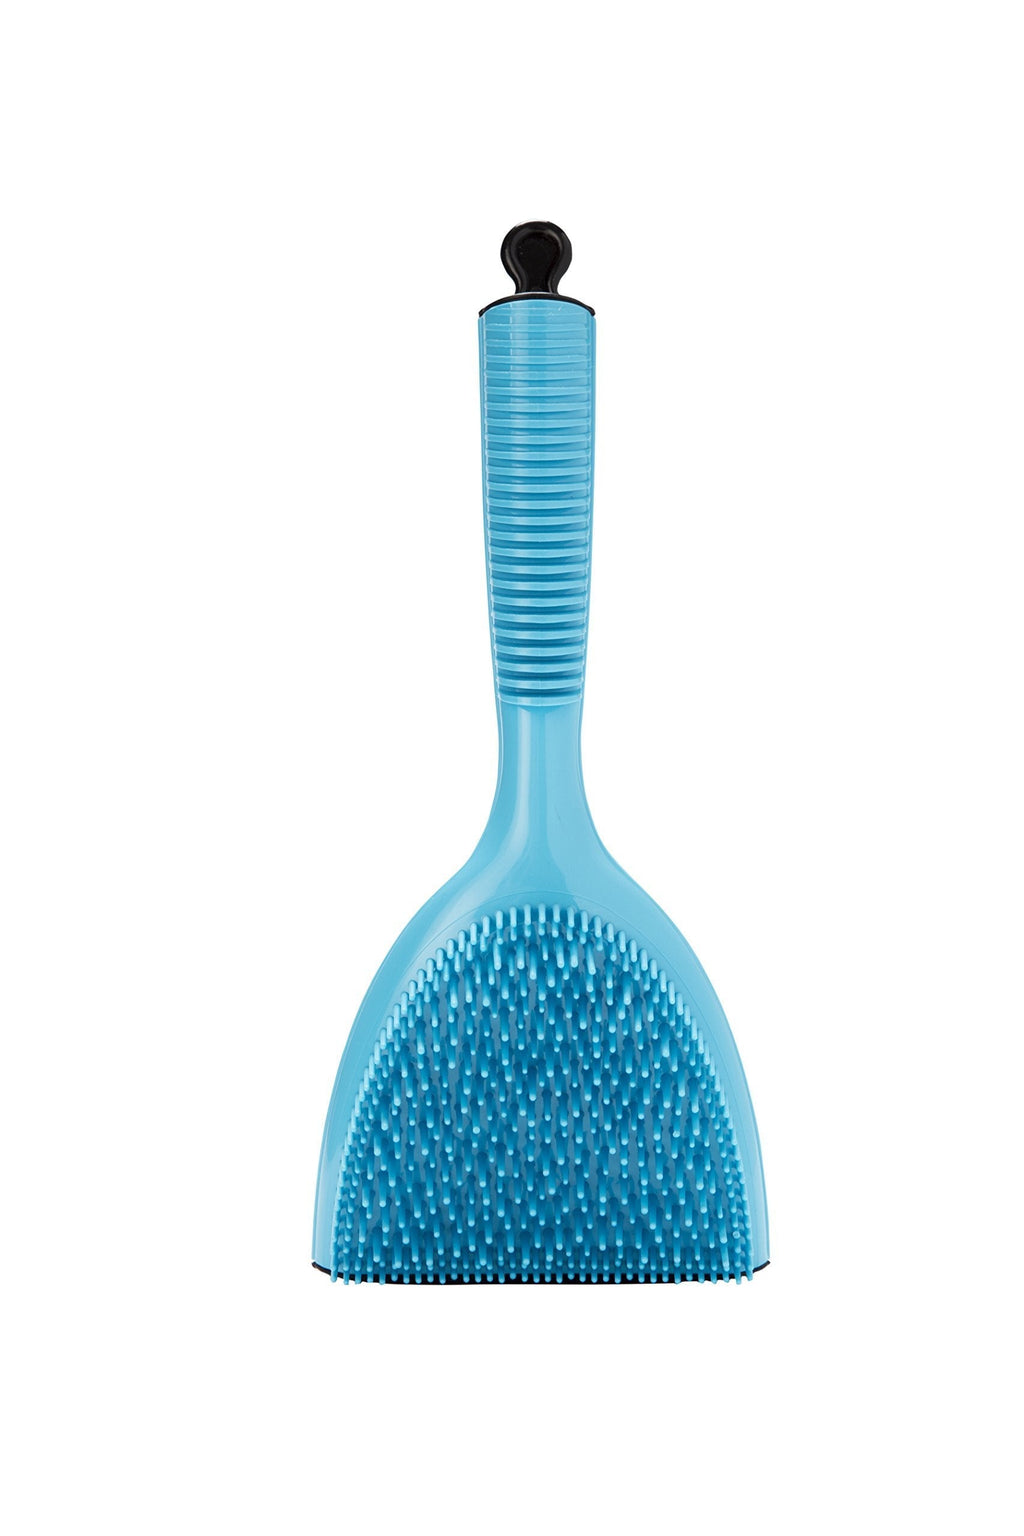 [Australia] - Michel Mercier Detangling Brush for Pet - Pet Brush for Grooming and Deshedding Dogs and Cats - Free Tick Remover Tool Included t (Thick Coat) Thick Coat 